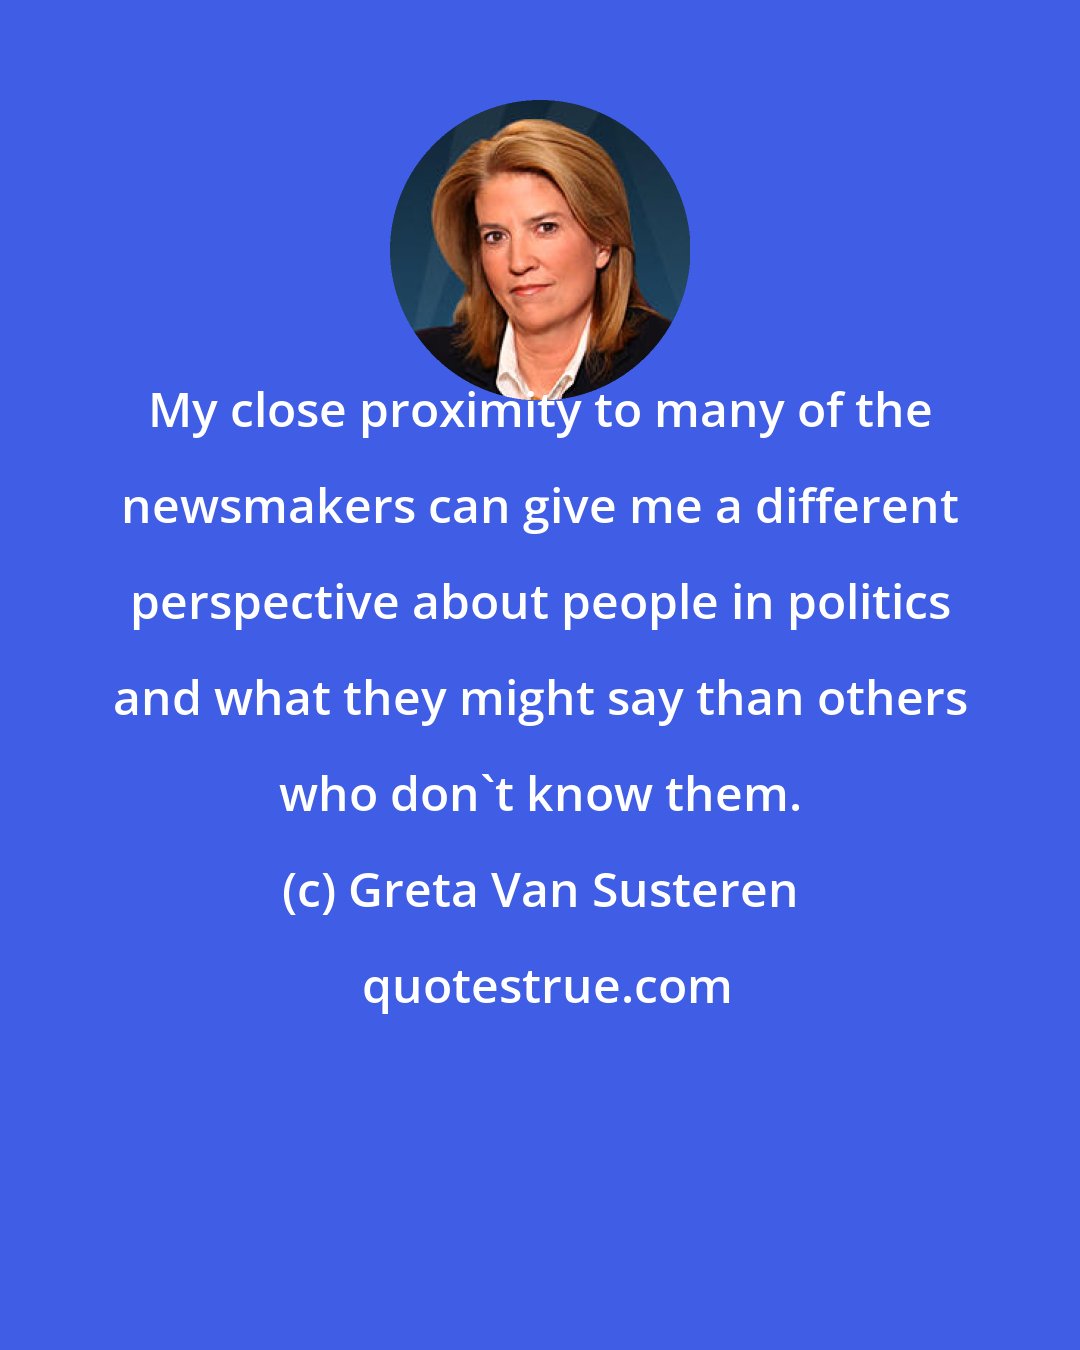 Greta Van Susteren: My close proximity to many of the newsmakers can give me a different perspective about people in politics and what they might say than others who don't know them.